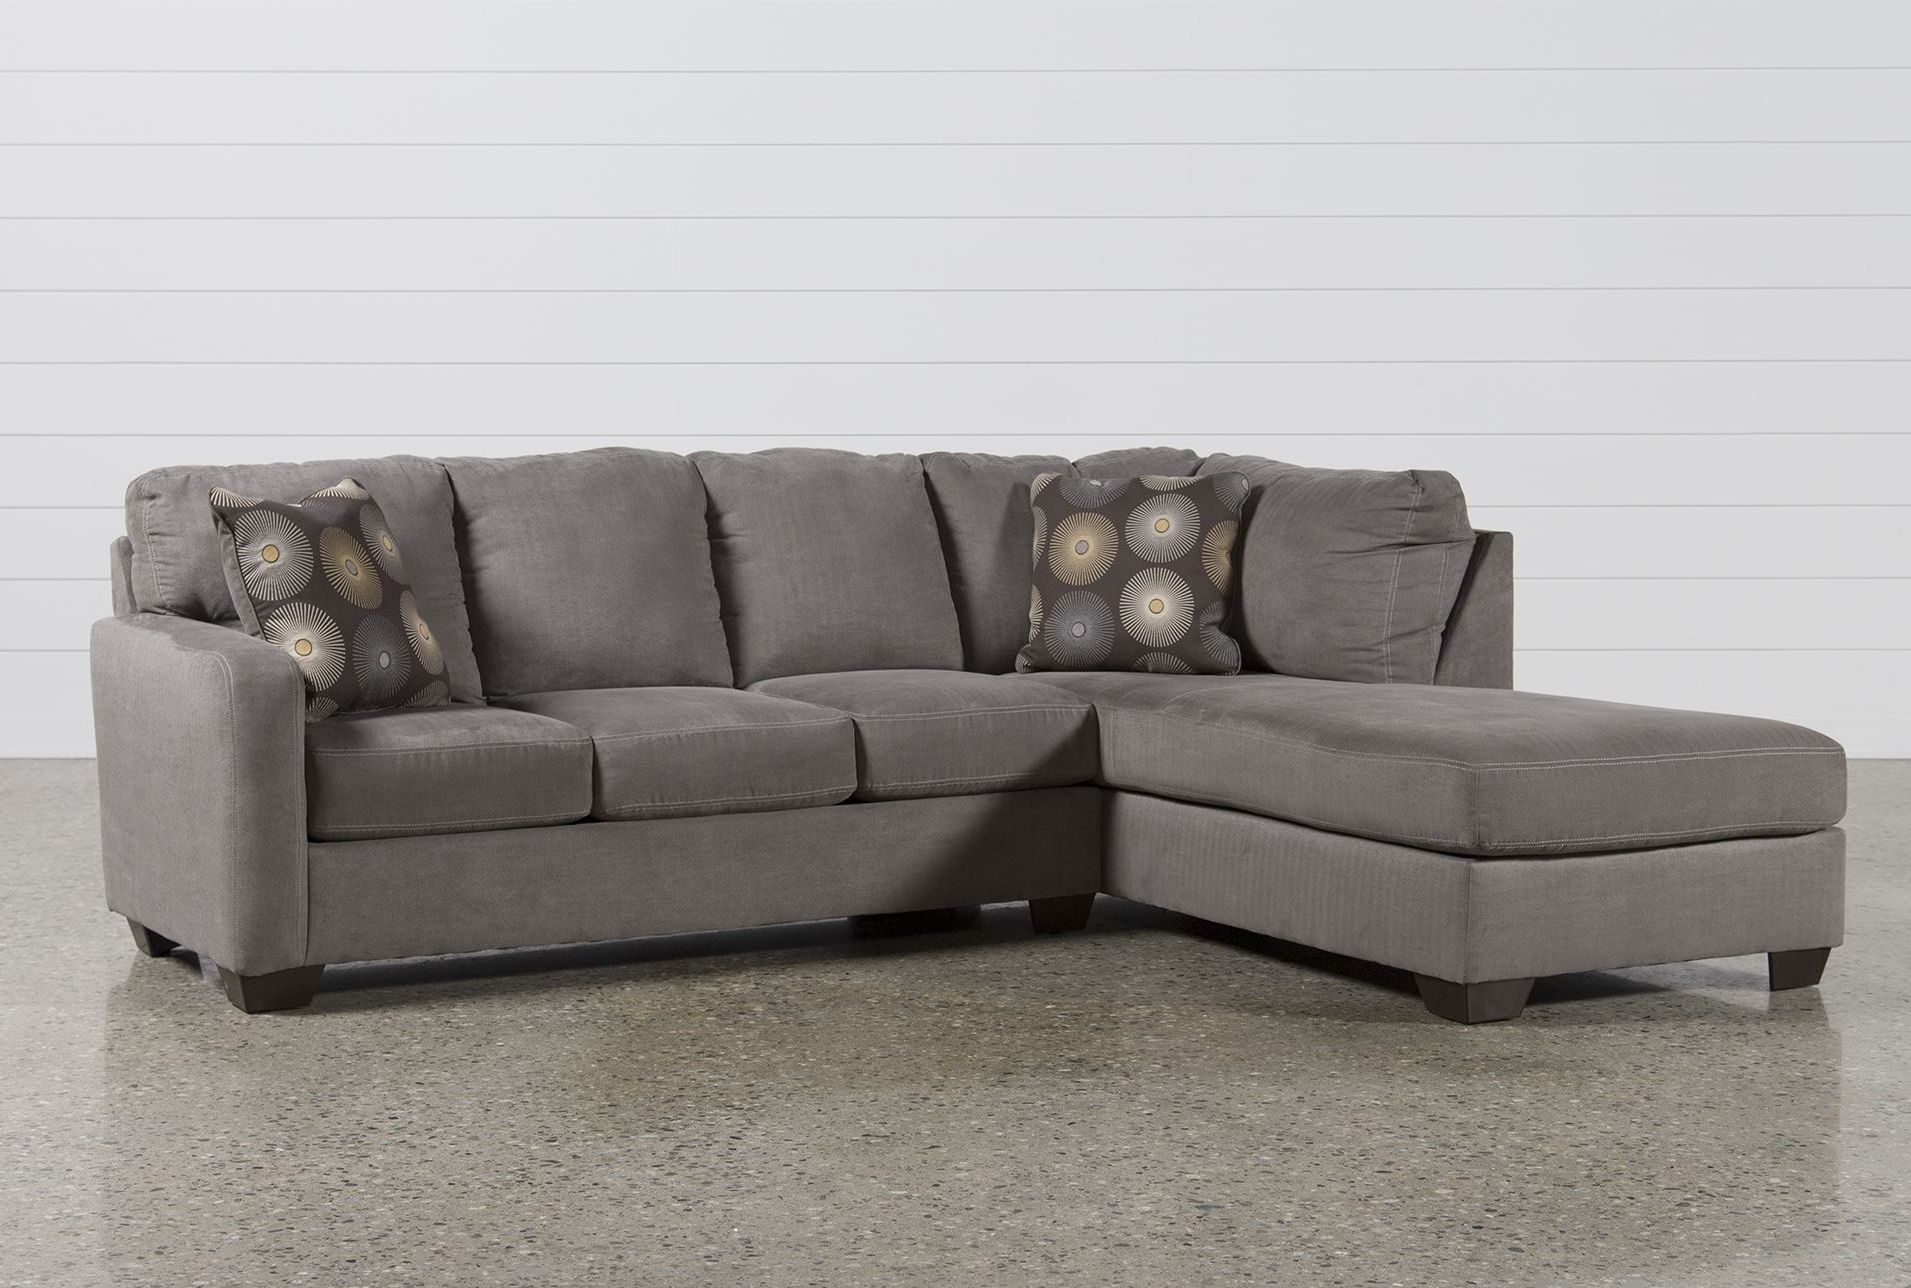 Sofa ~ Luxury Leather Sofa With Chaise Lounge D1450 D1460 120616 With Latest Sofas With Chaise (View 8 of 15)